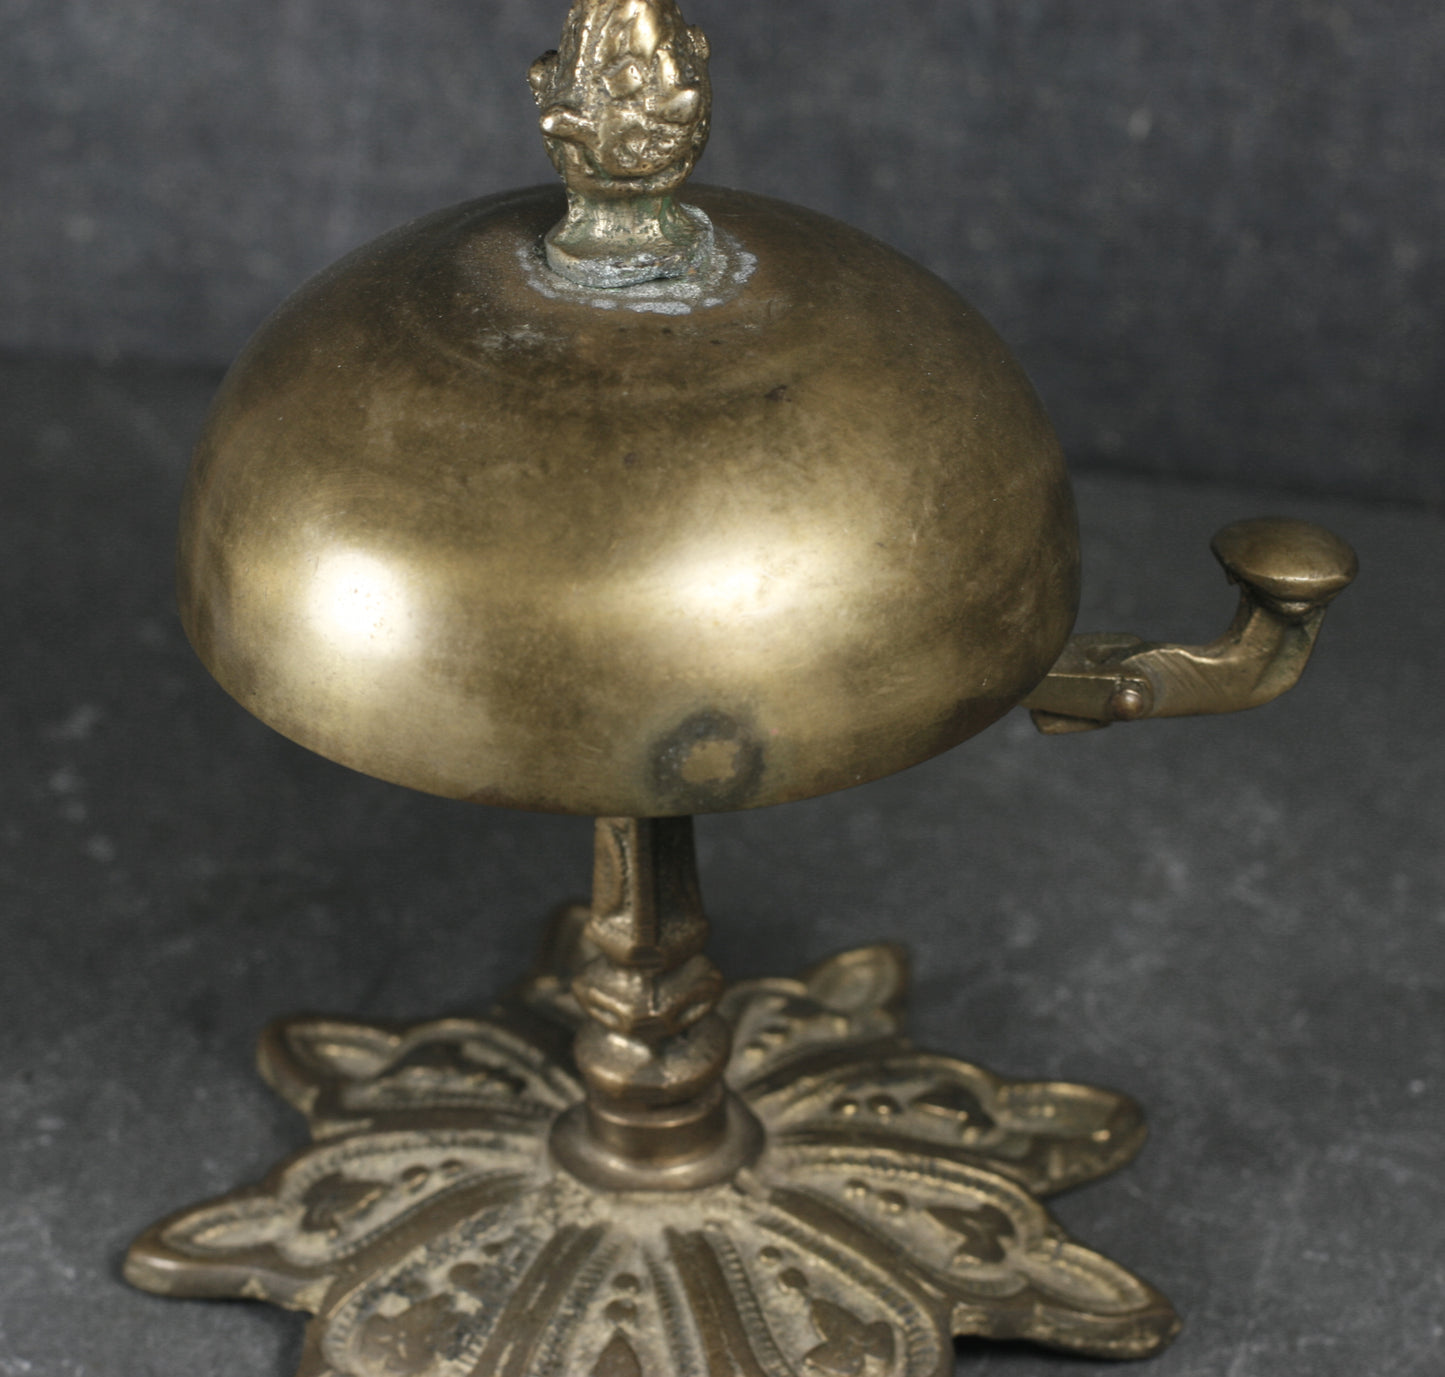 Antique Hotel Bell, Front Desk Call Bell